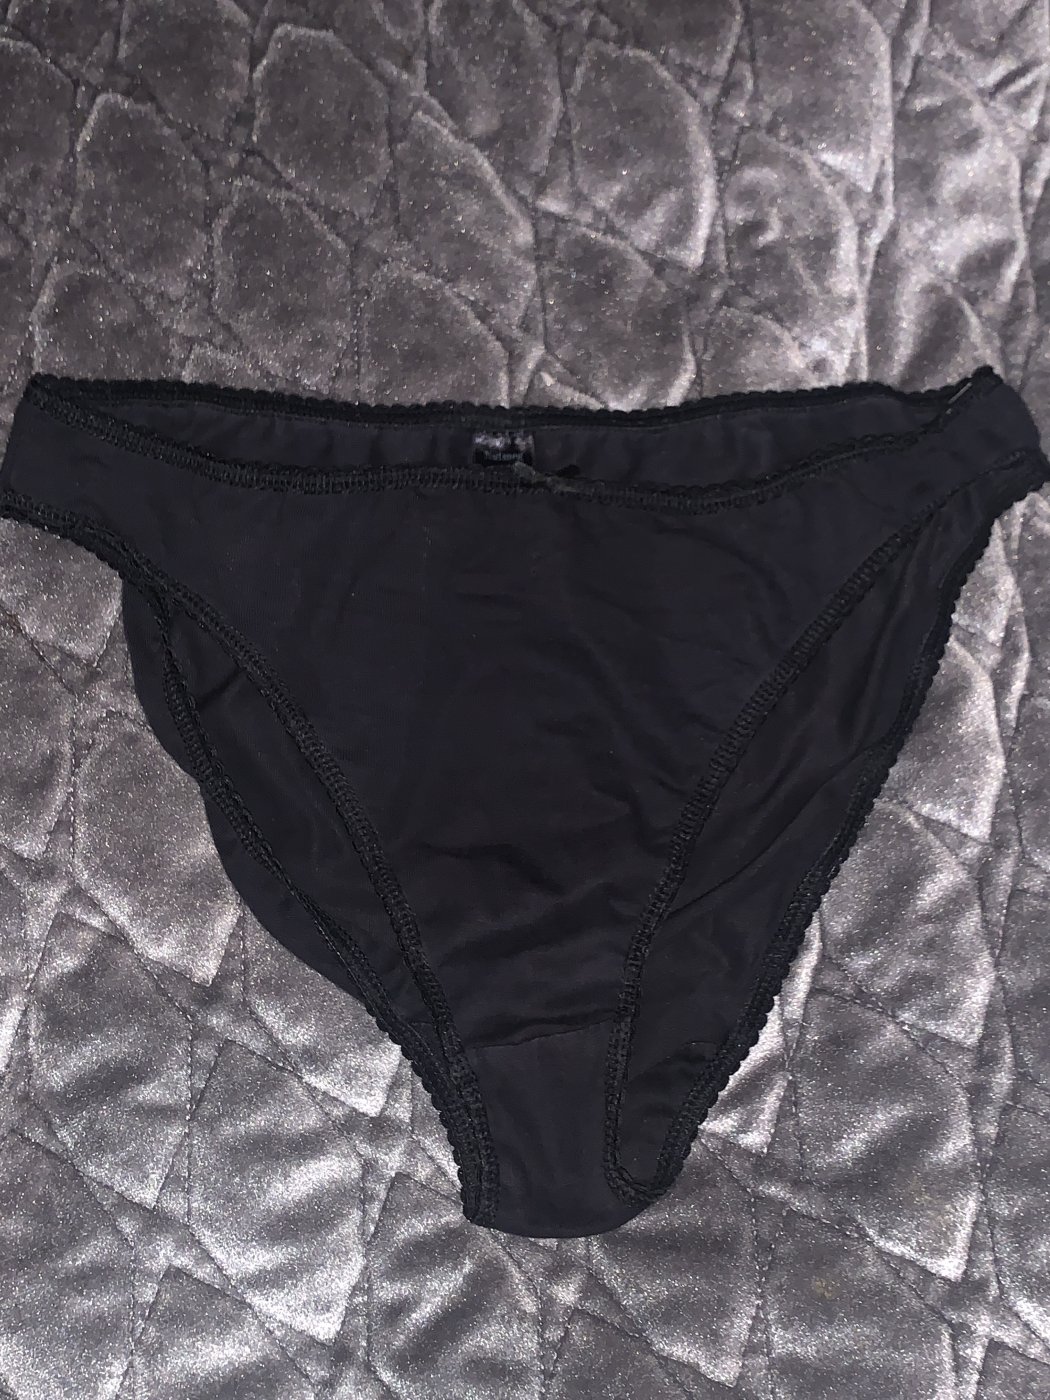 Dirty knickers from 12 hour shif…